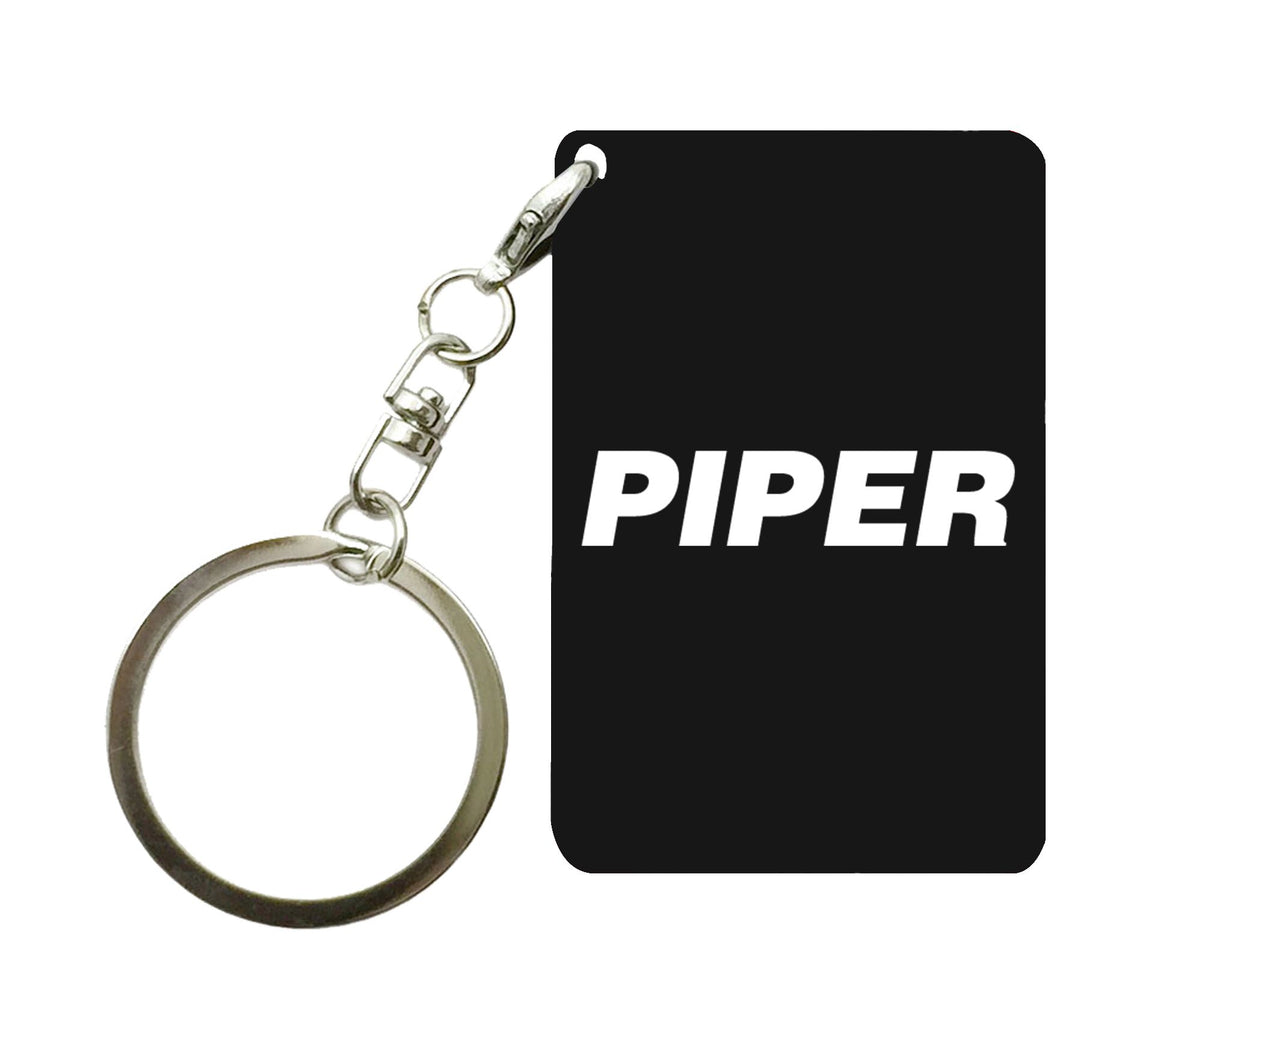 Piper & Text Designed Key Chains